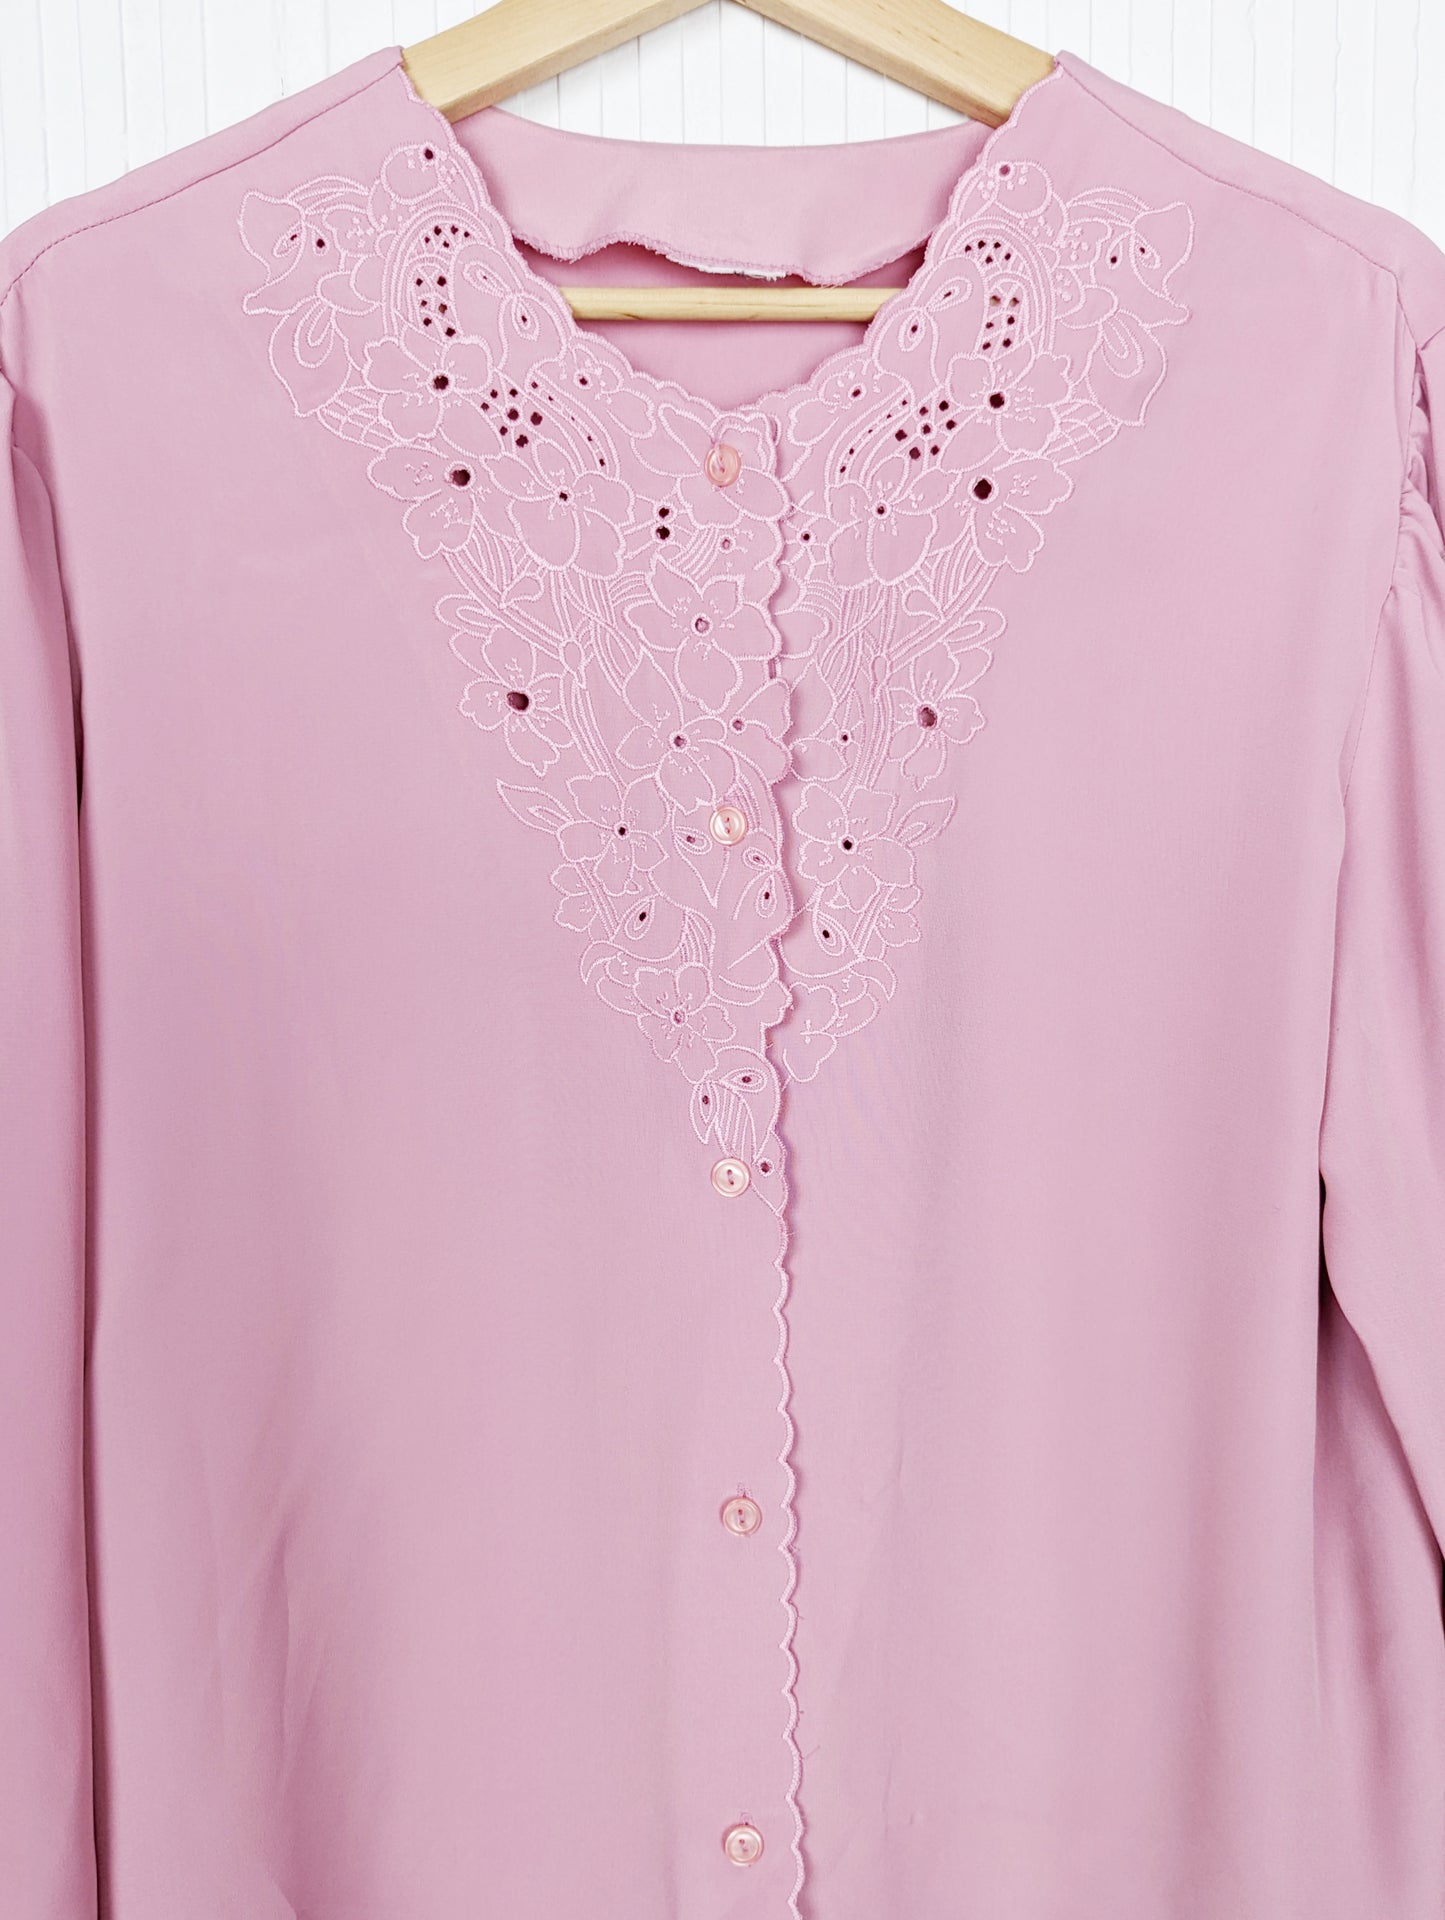 Chemise rose à broderies 90's